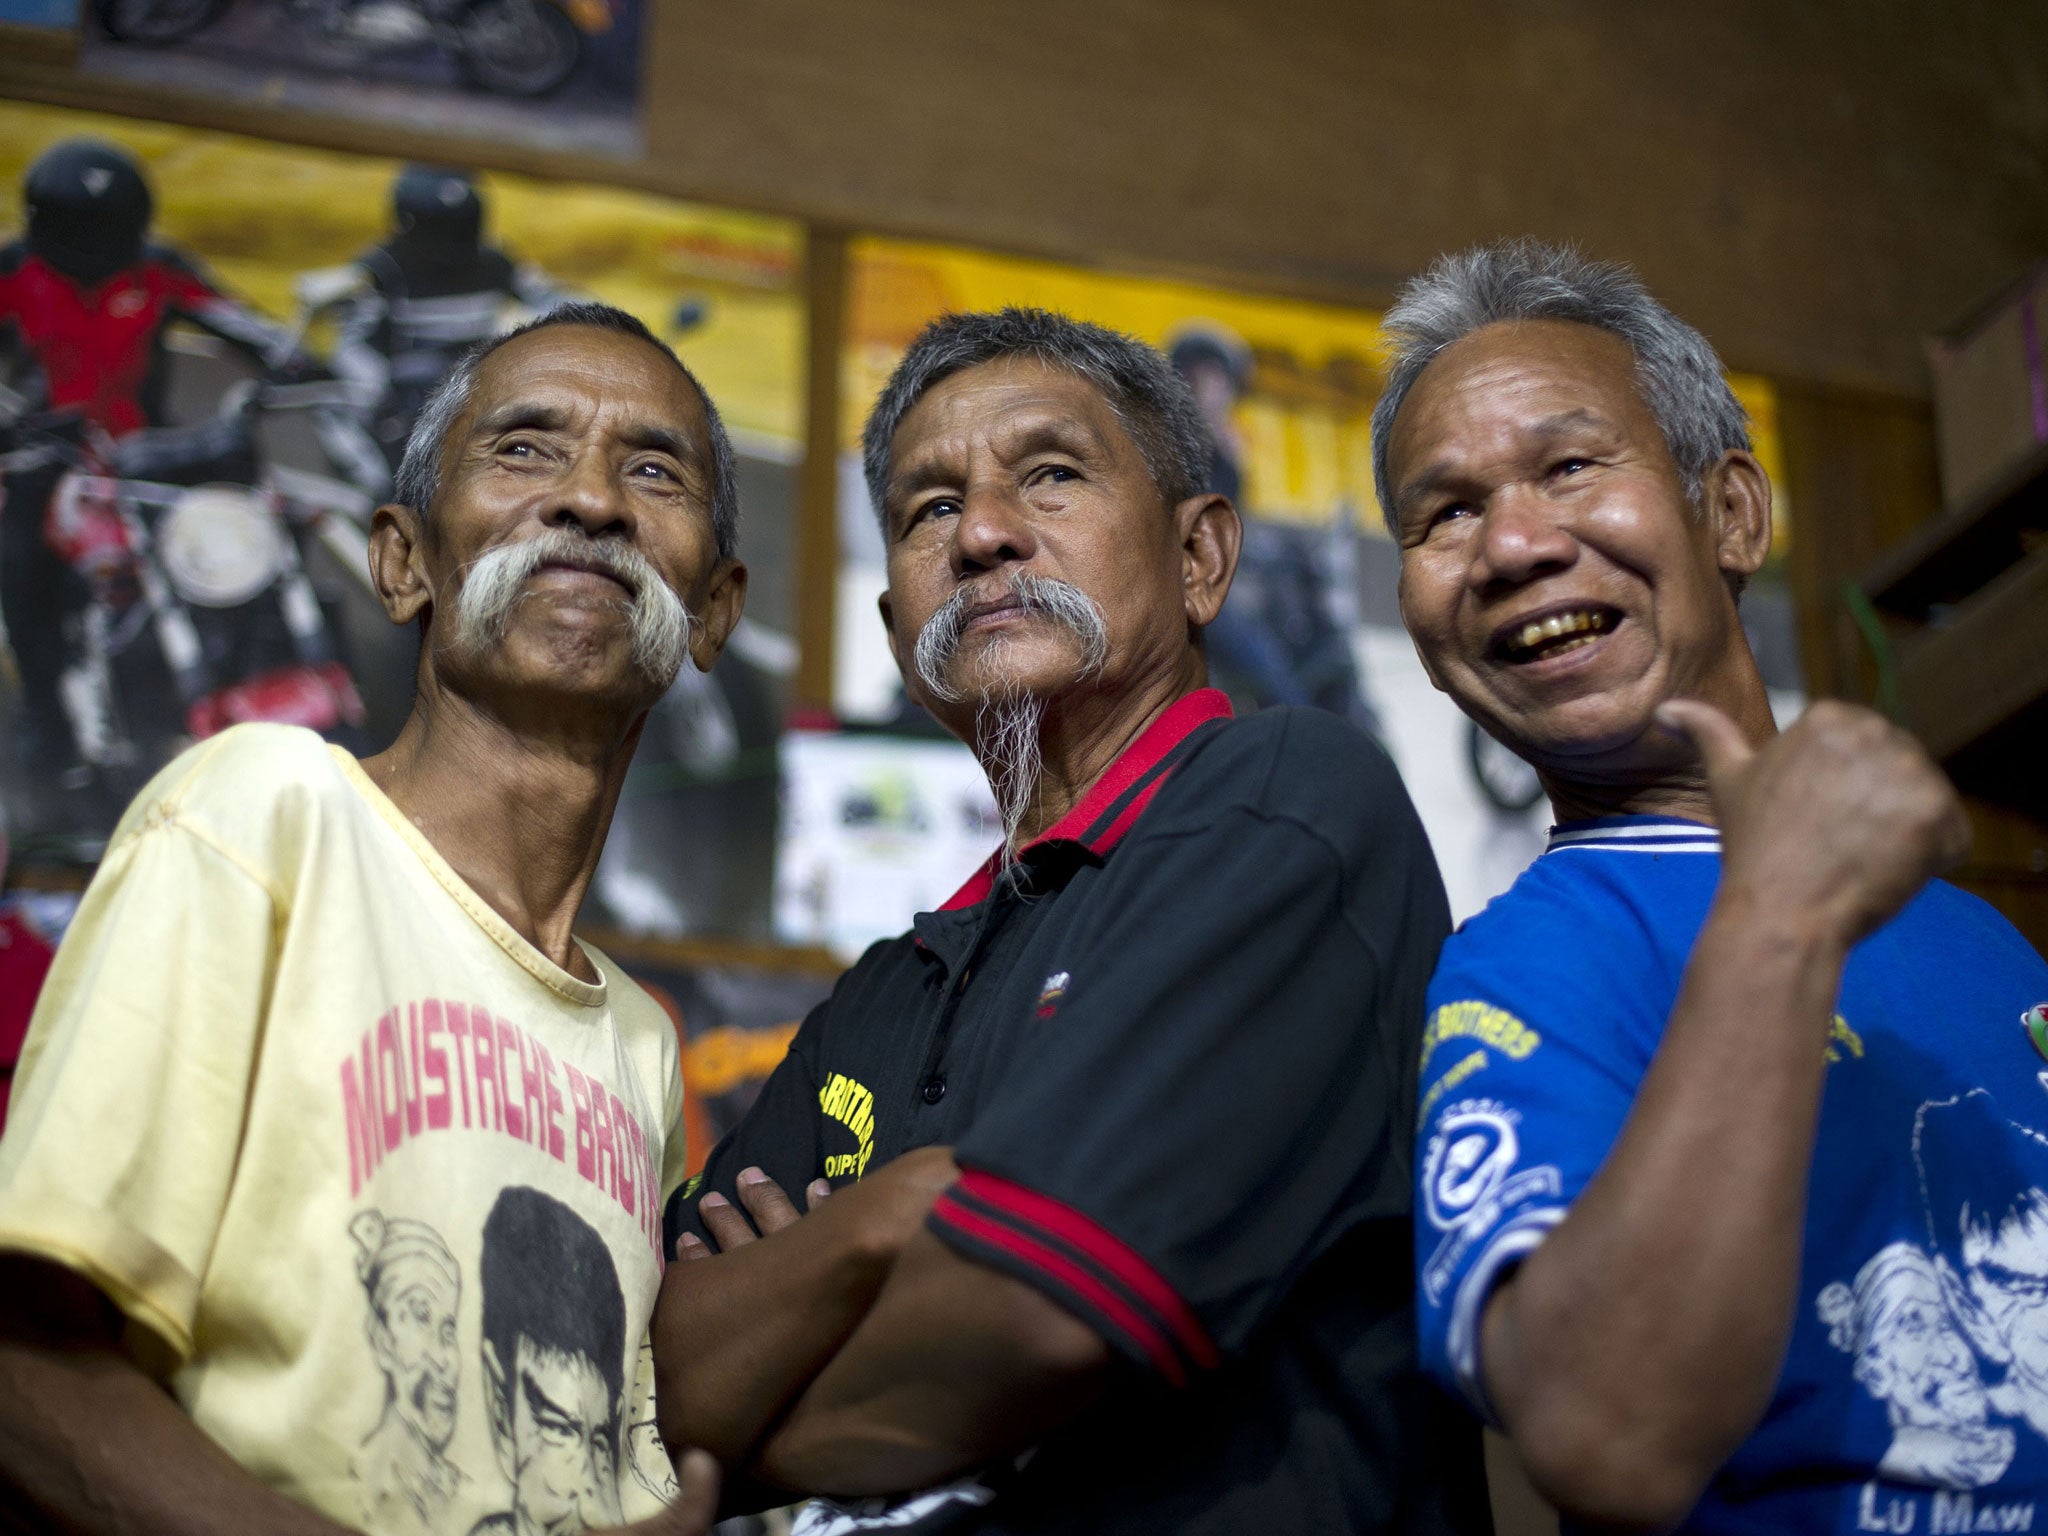 The Moustache Brothers in 2012, from left to right, Lu Maw, Par Par Lay and Lu Zaw